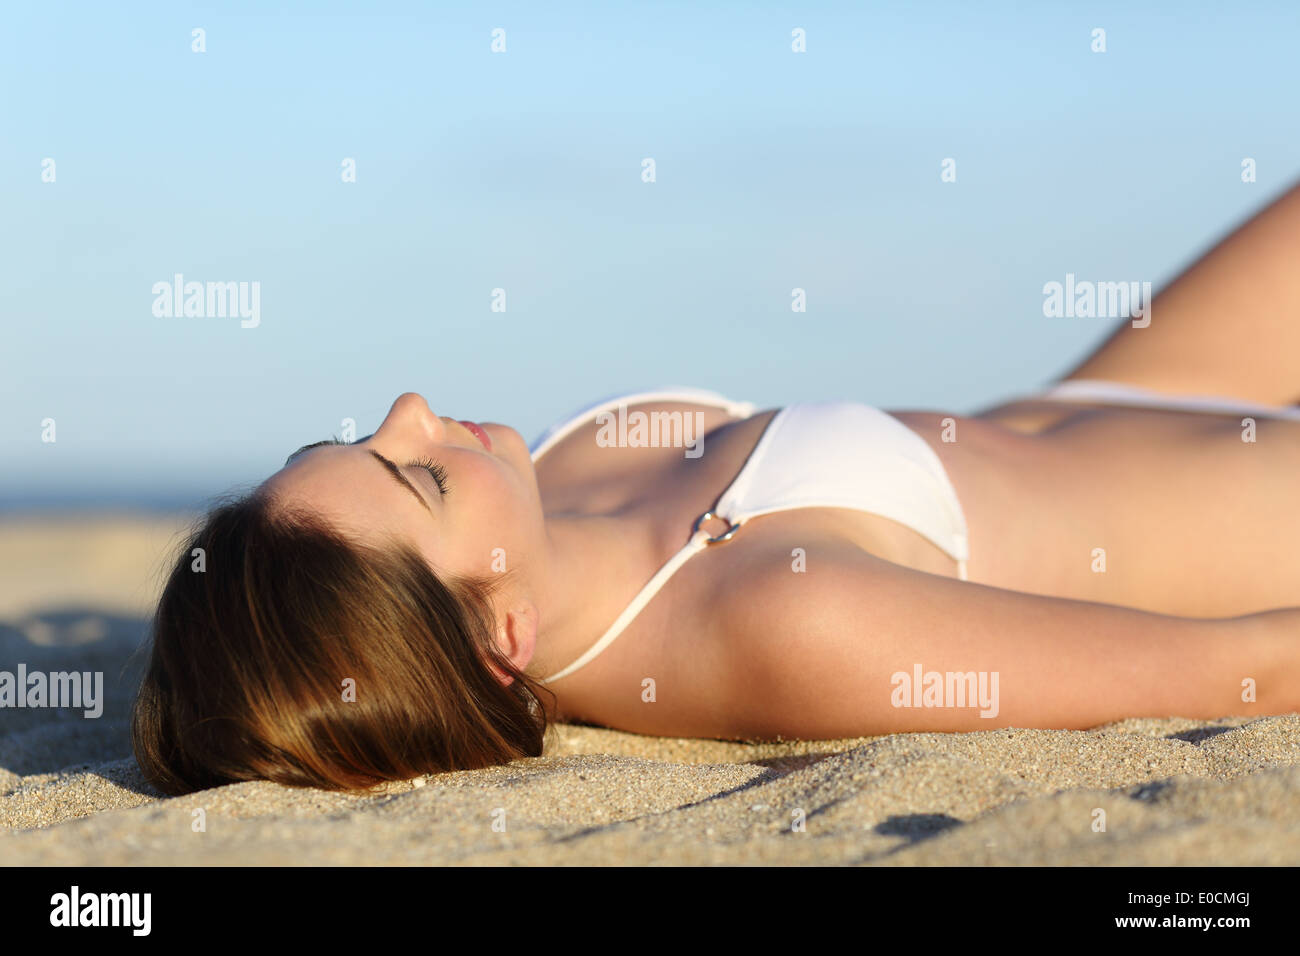 Beautiful woman sunbathing lying on the beach with the sky in the background Stock Photo